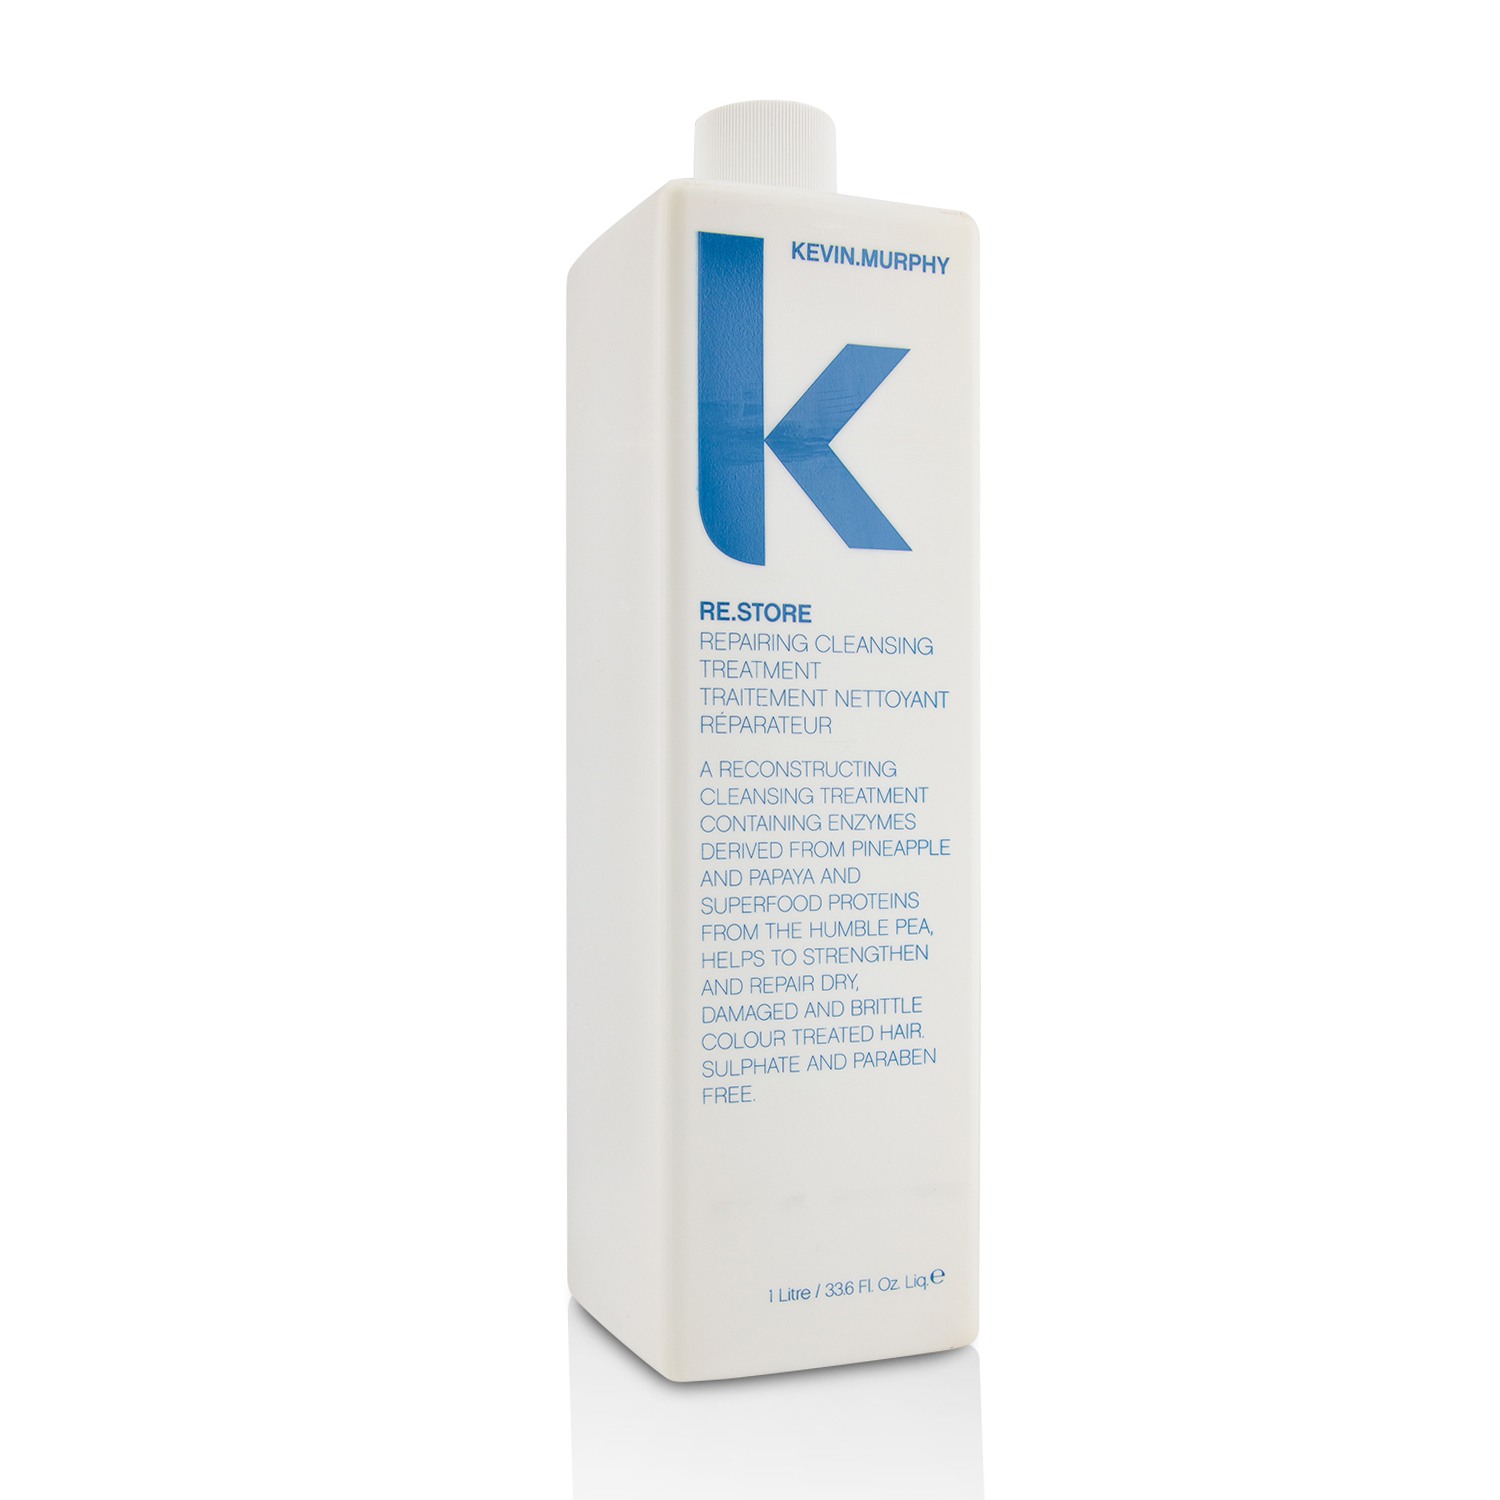 Re.Store (Repairing Cleansing Treatment) Kevin.Murphy Image